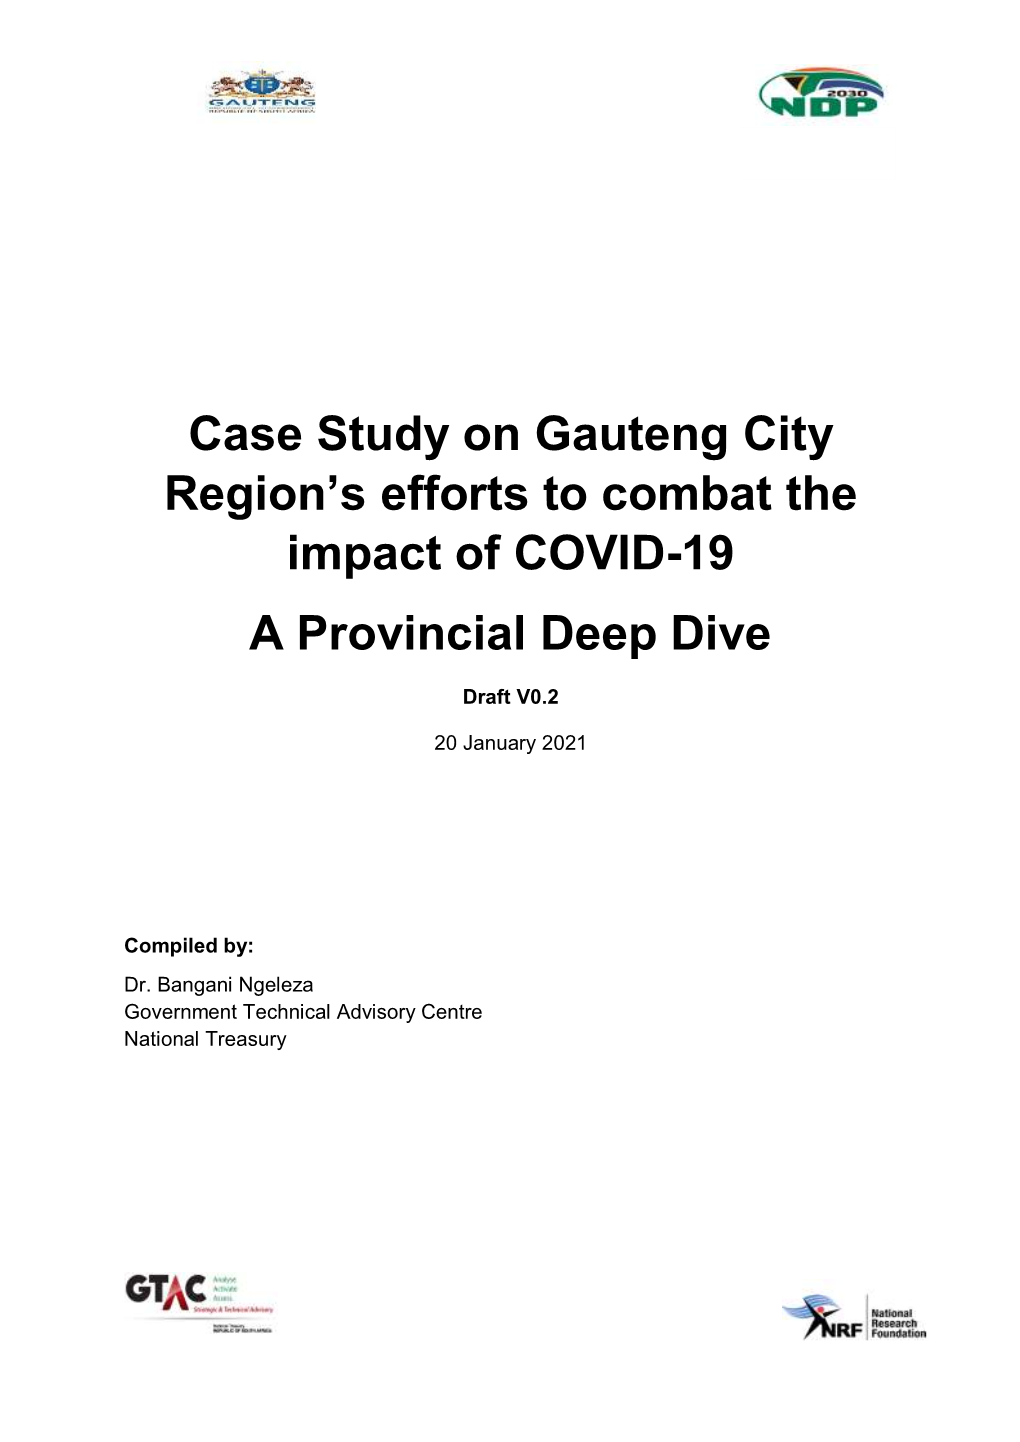 Case Study on Gauteng City Region's Efforts to Combat the Impact Of